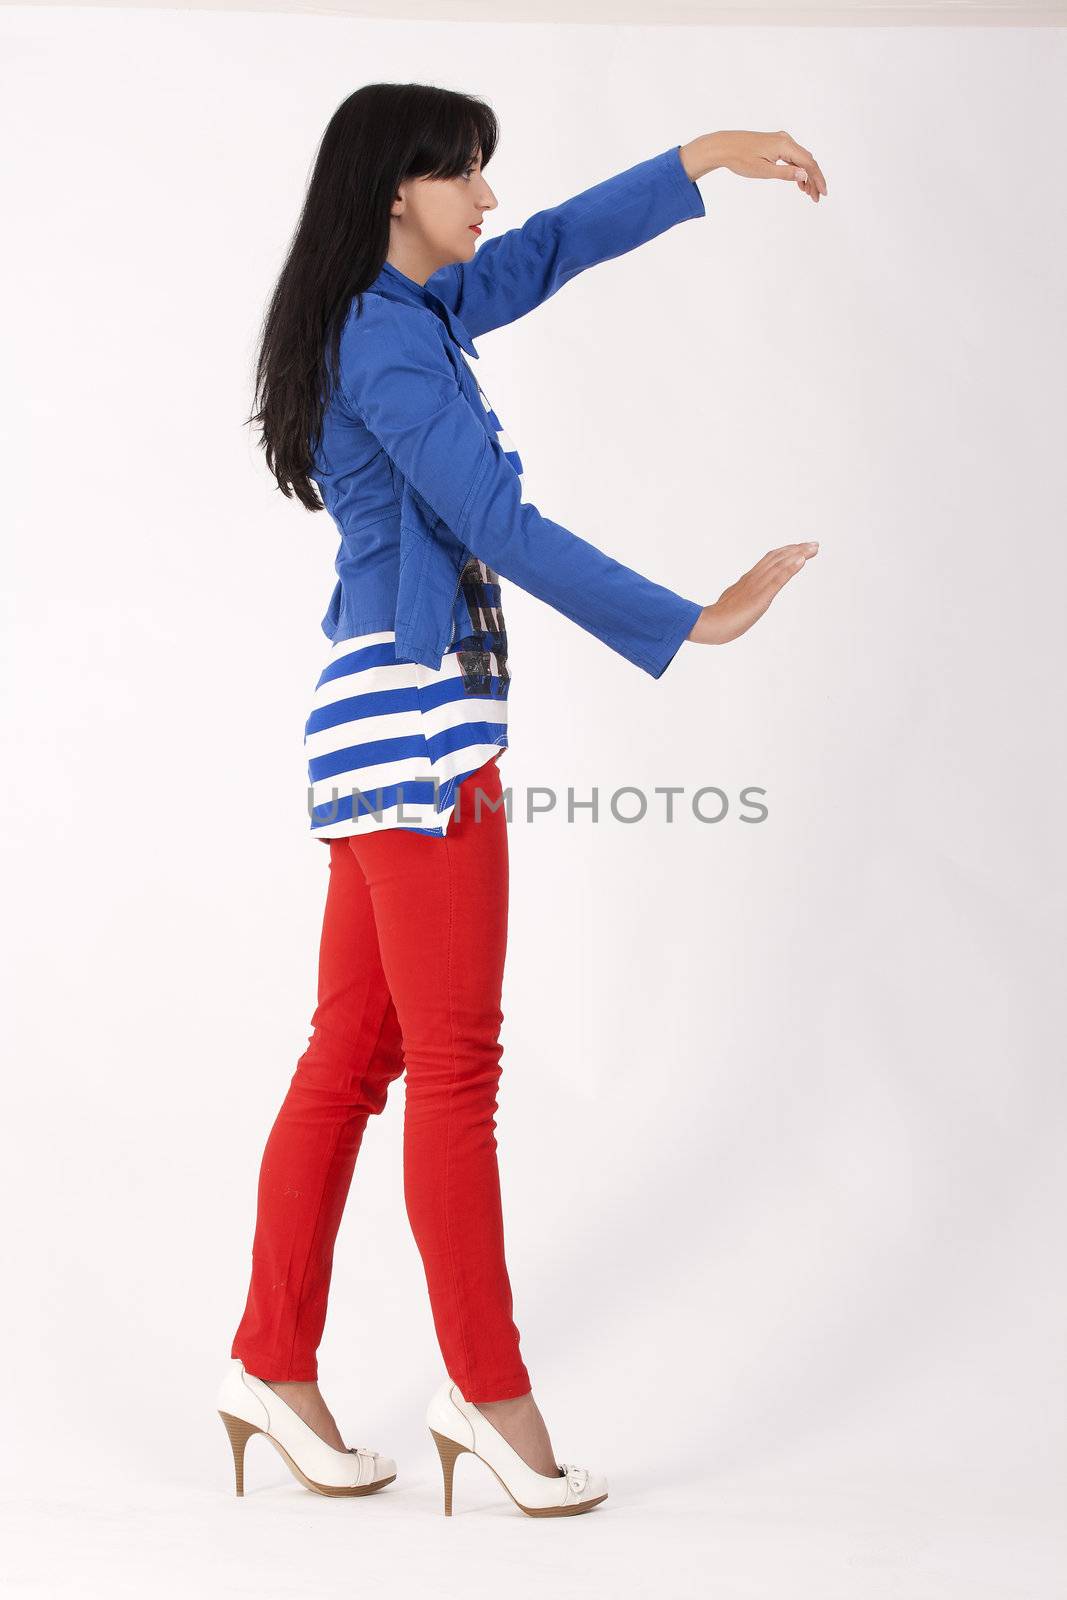 Model posing with red pants, striped shirt and blue jacket